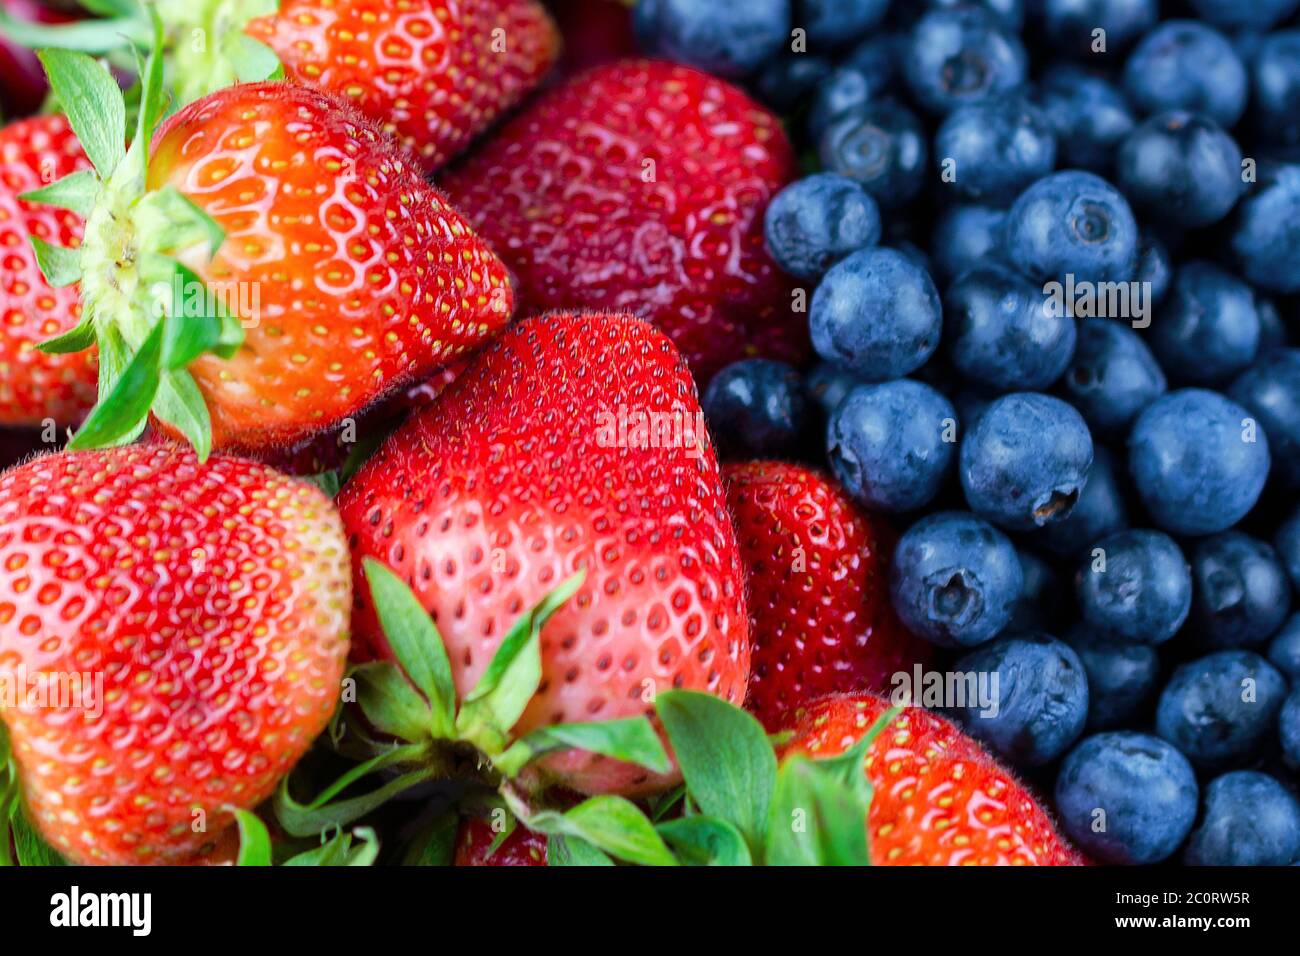 A close up view of strawberries and blueberries. Stock Photo